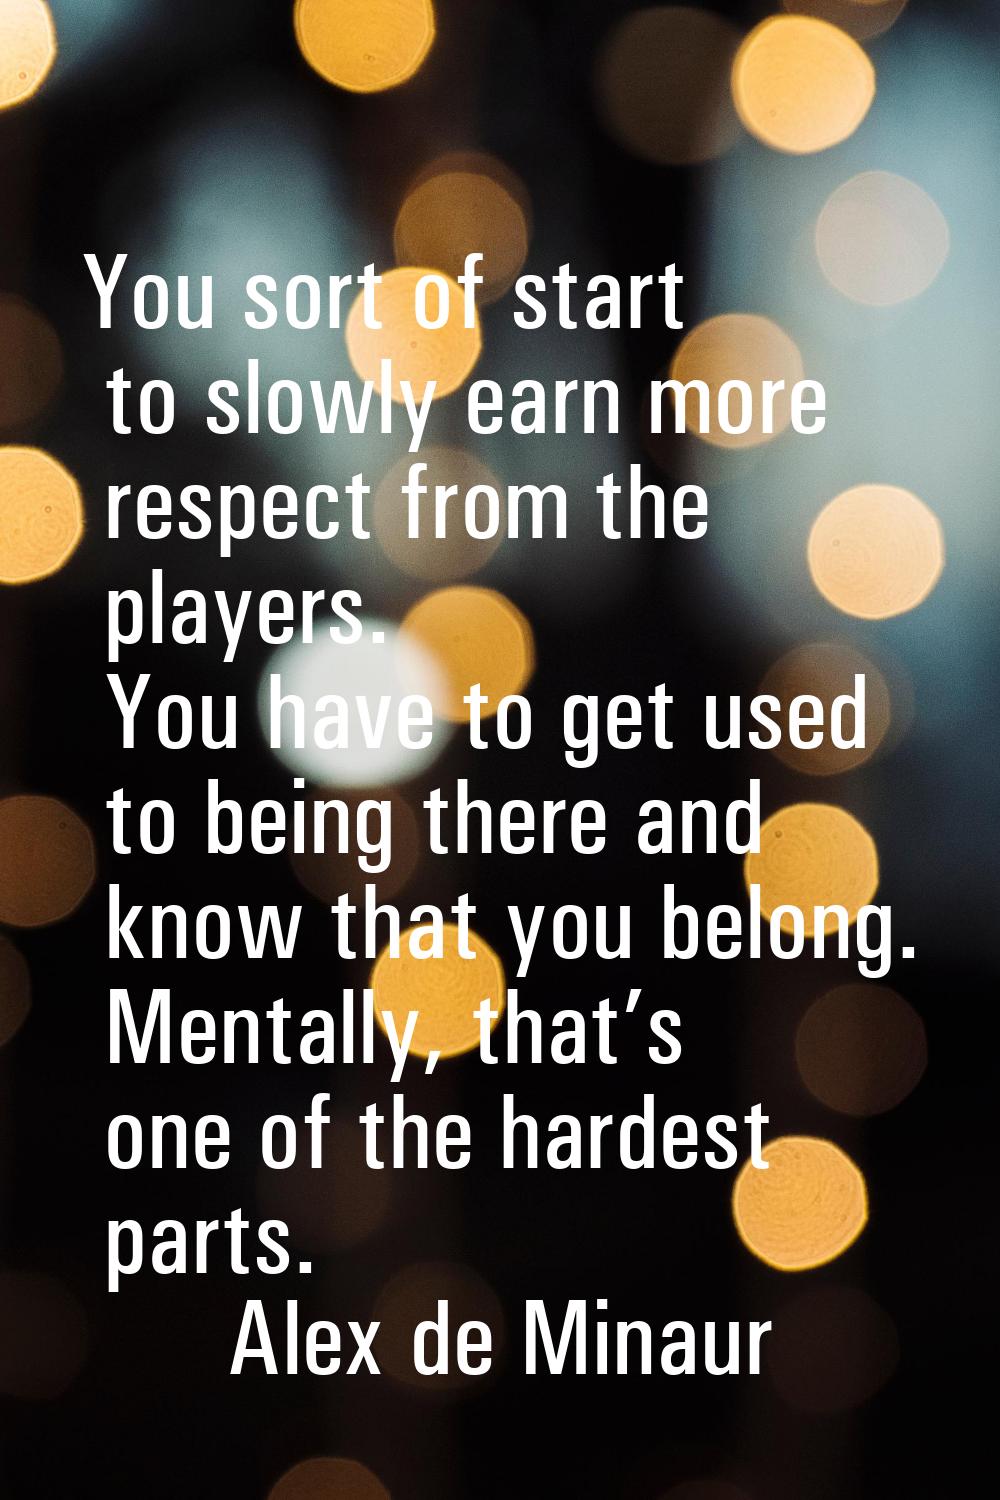 You sort of start to slowly earn more respect from the players. You have to get used to being there